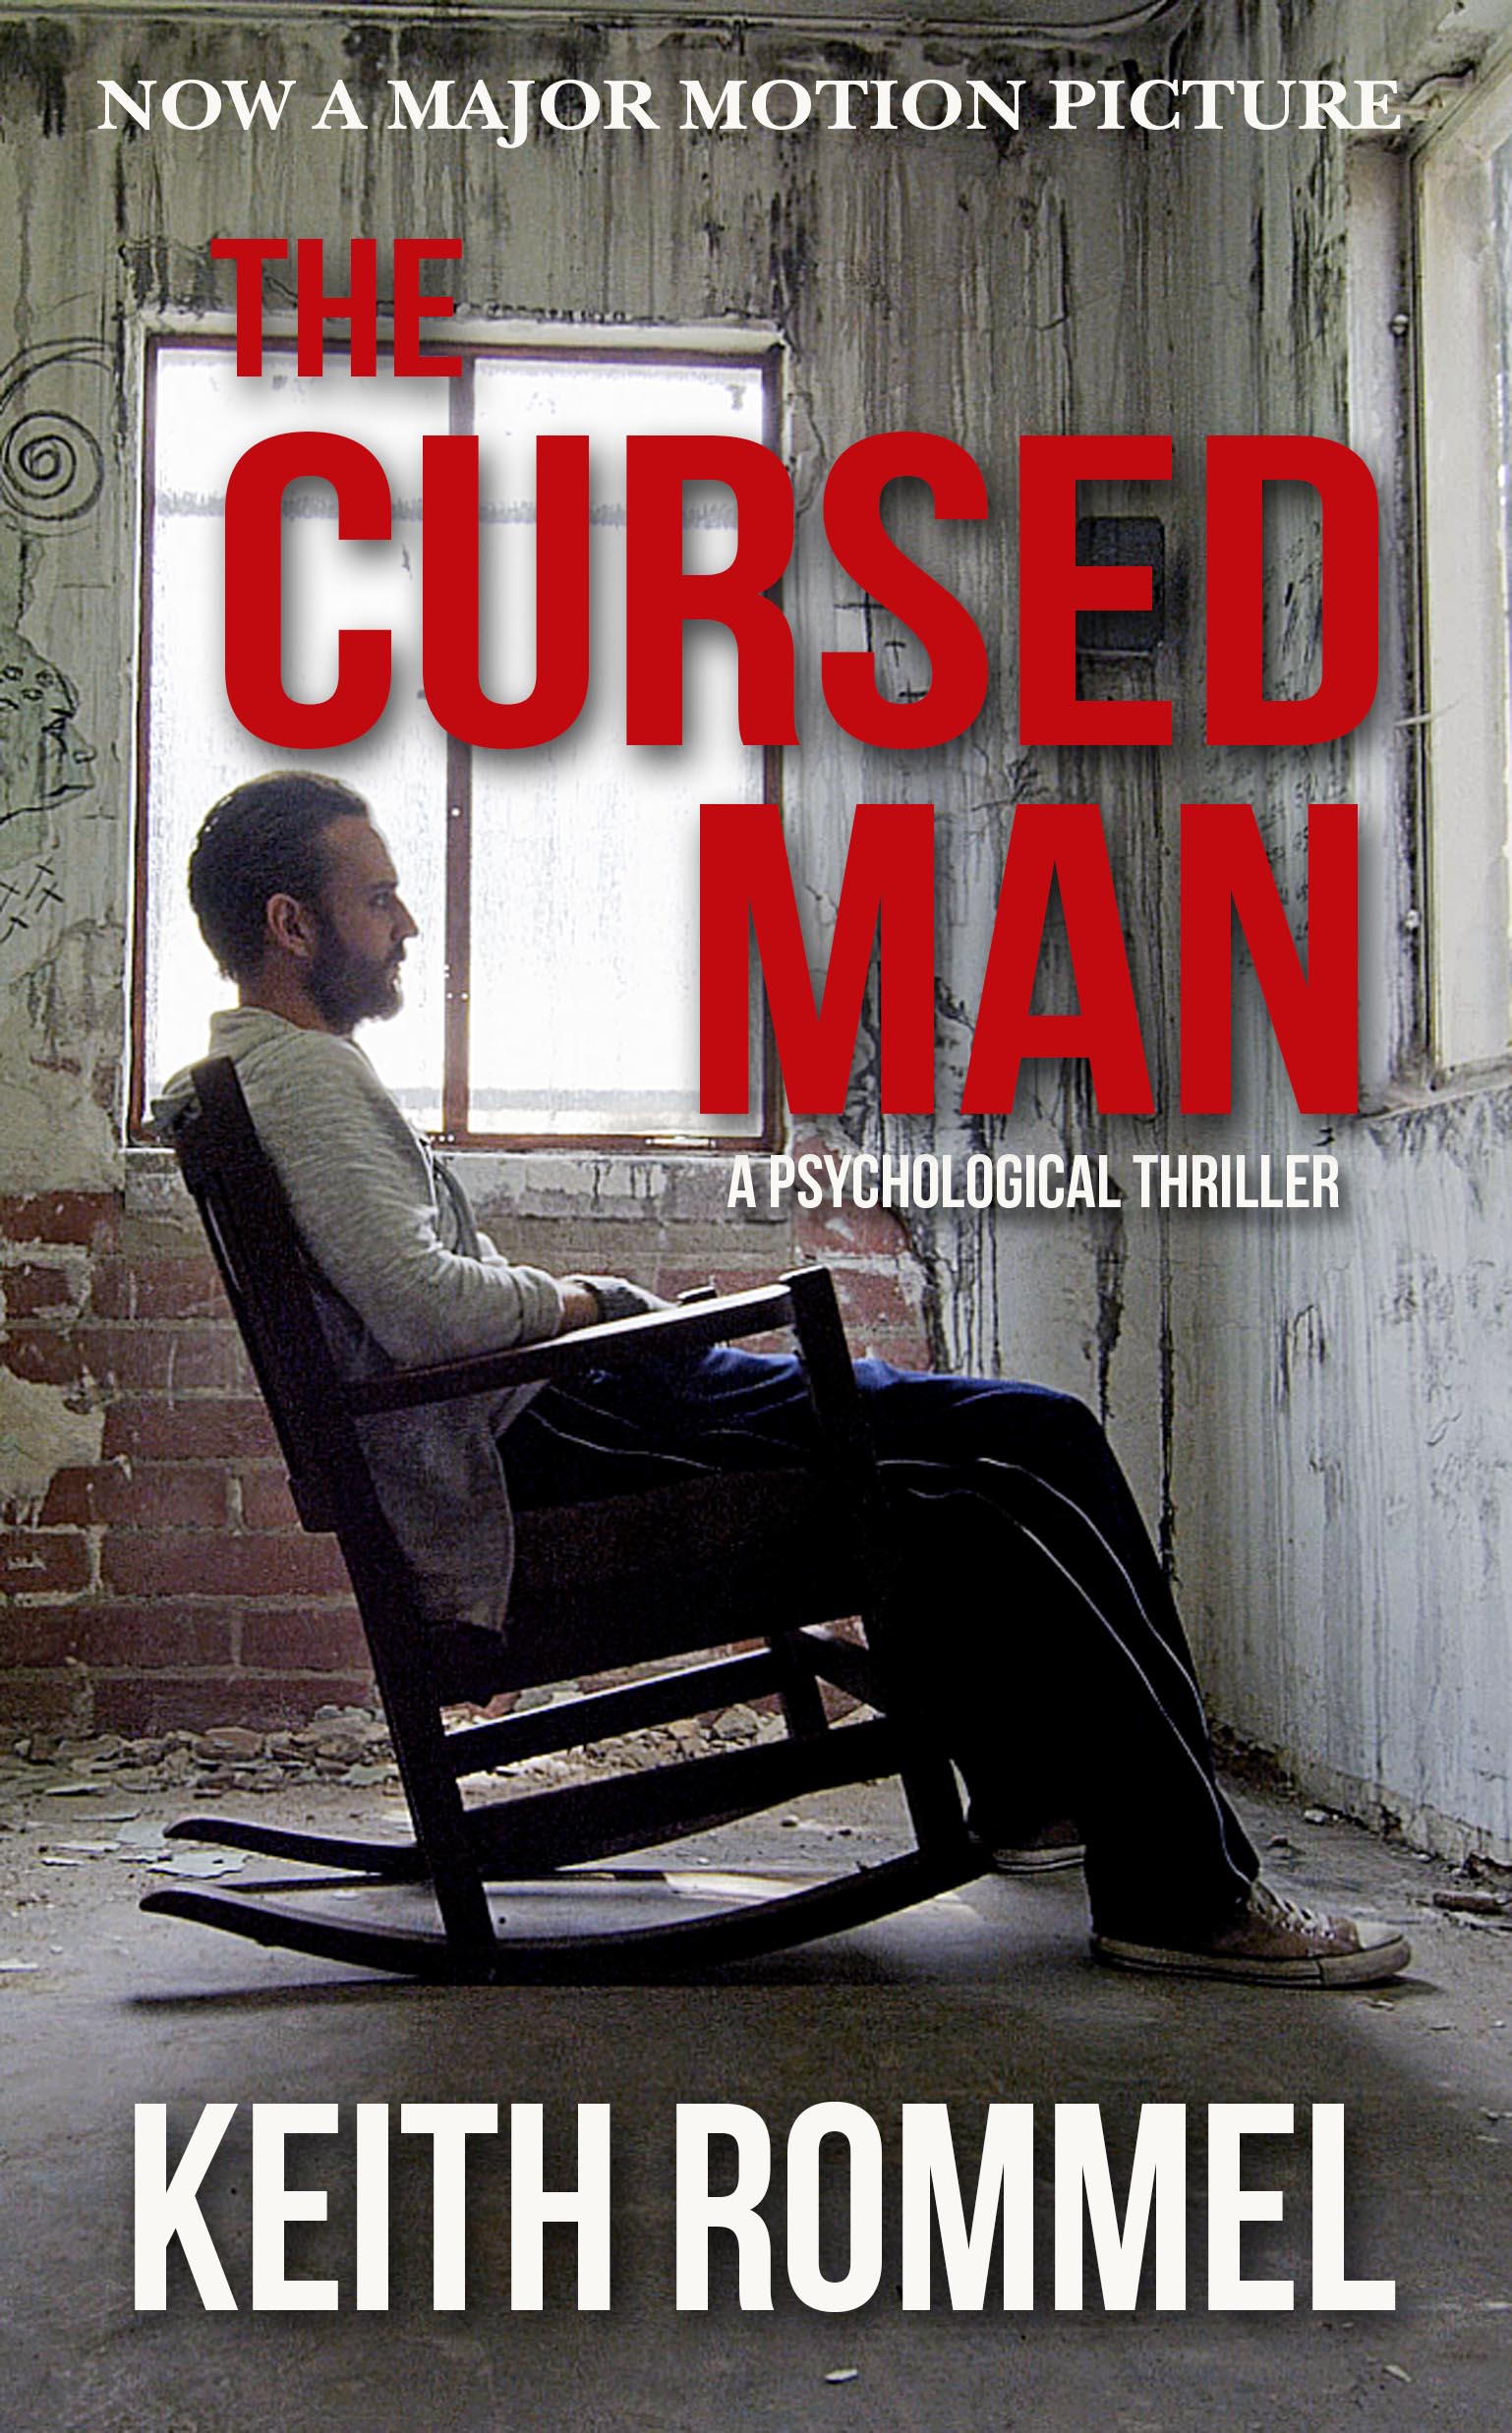 Keith Rommel takes the top spot at Hellbender Books for December with “The Cursed Man”